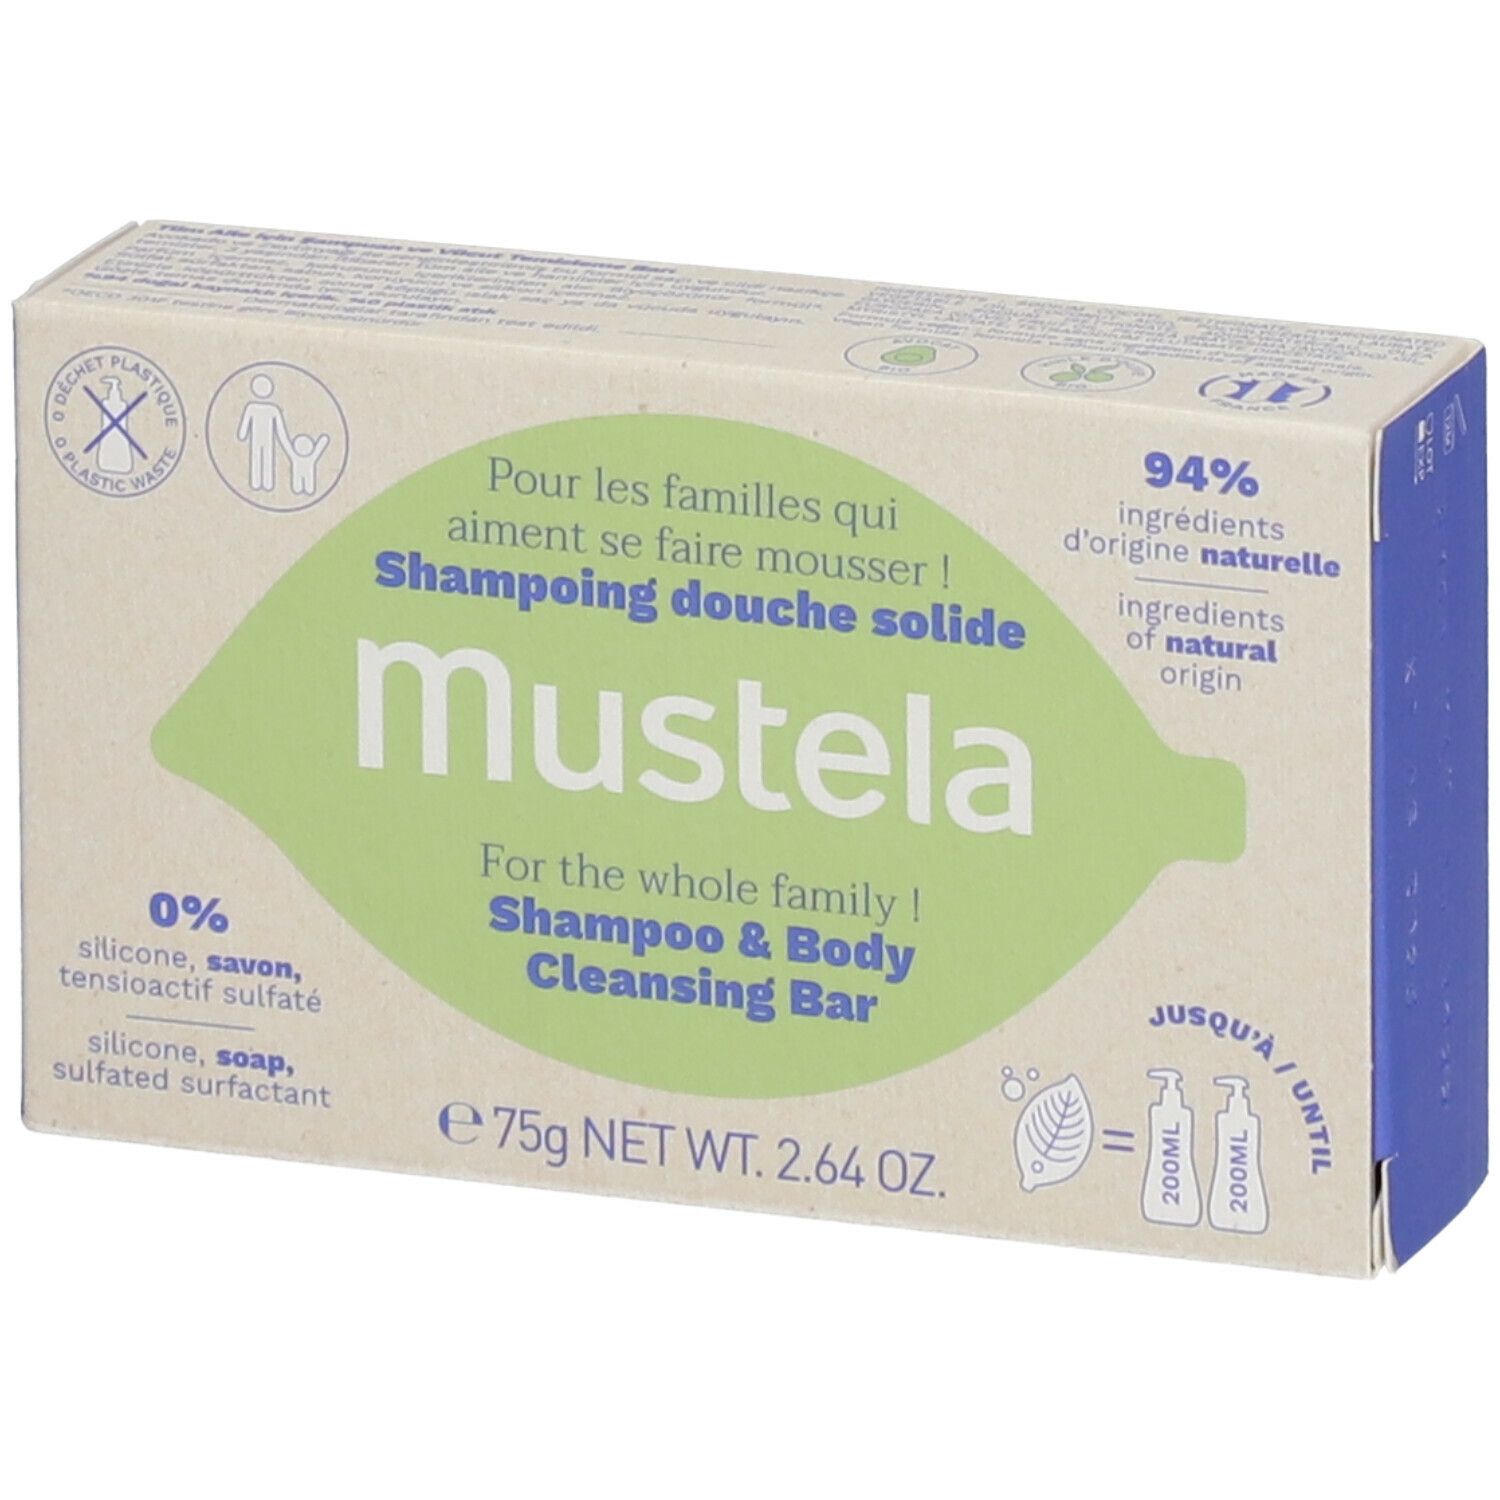 mustela® Shampoing Douche Solide Huile d'avocat BIO